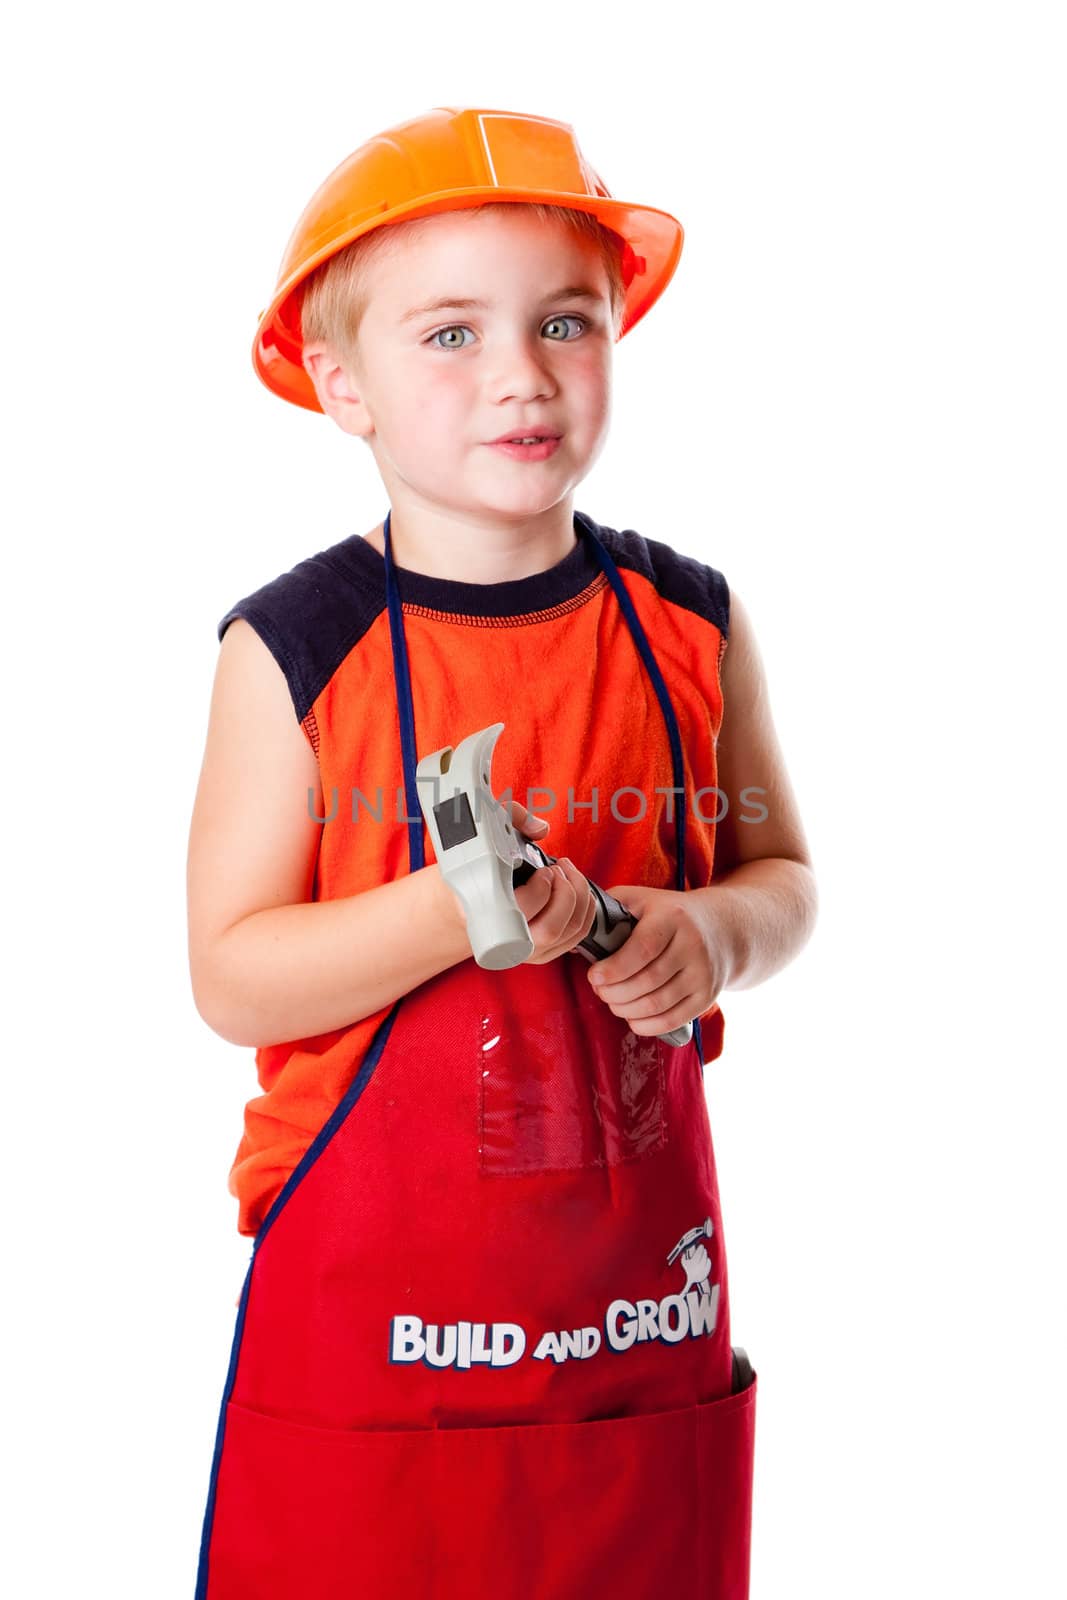 Little Caucasian boy dressed in orrange with construction helmet and apron with pockets, holding a hammer, isolated.